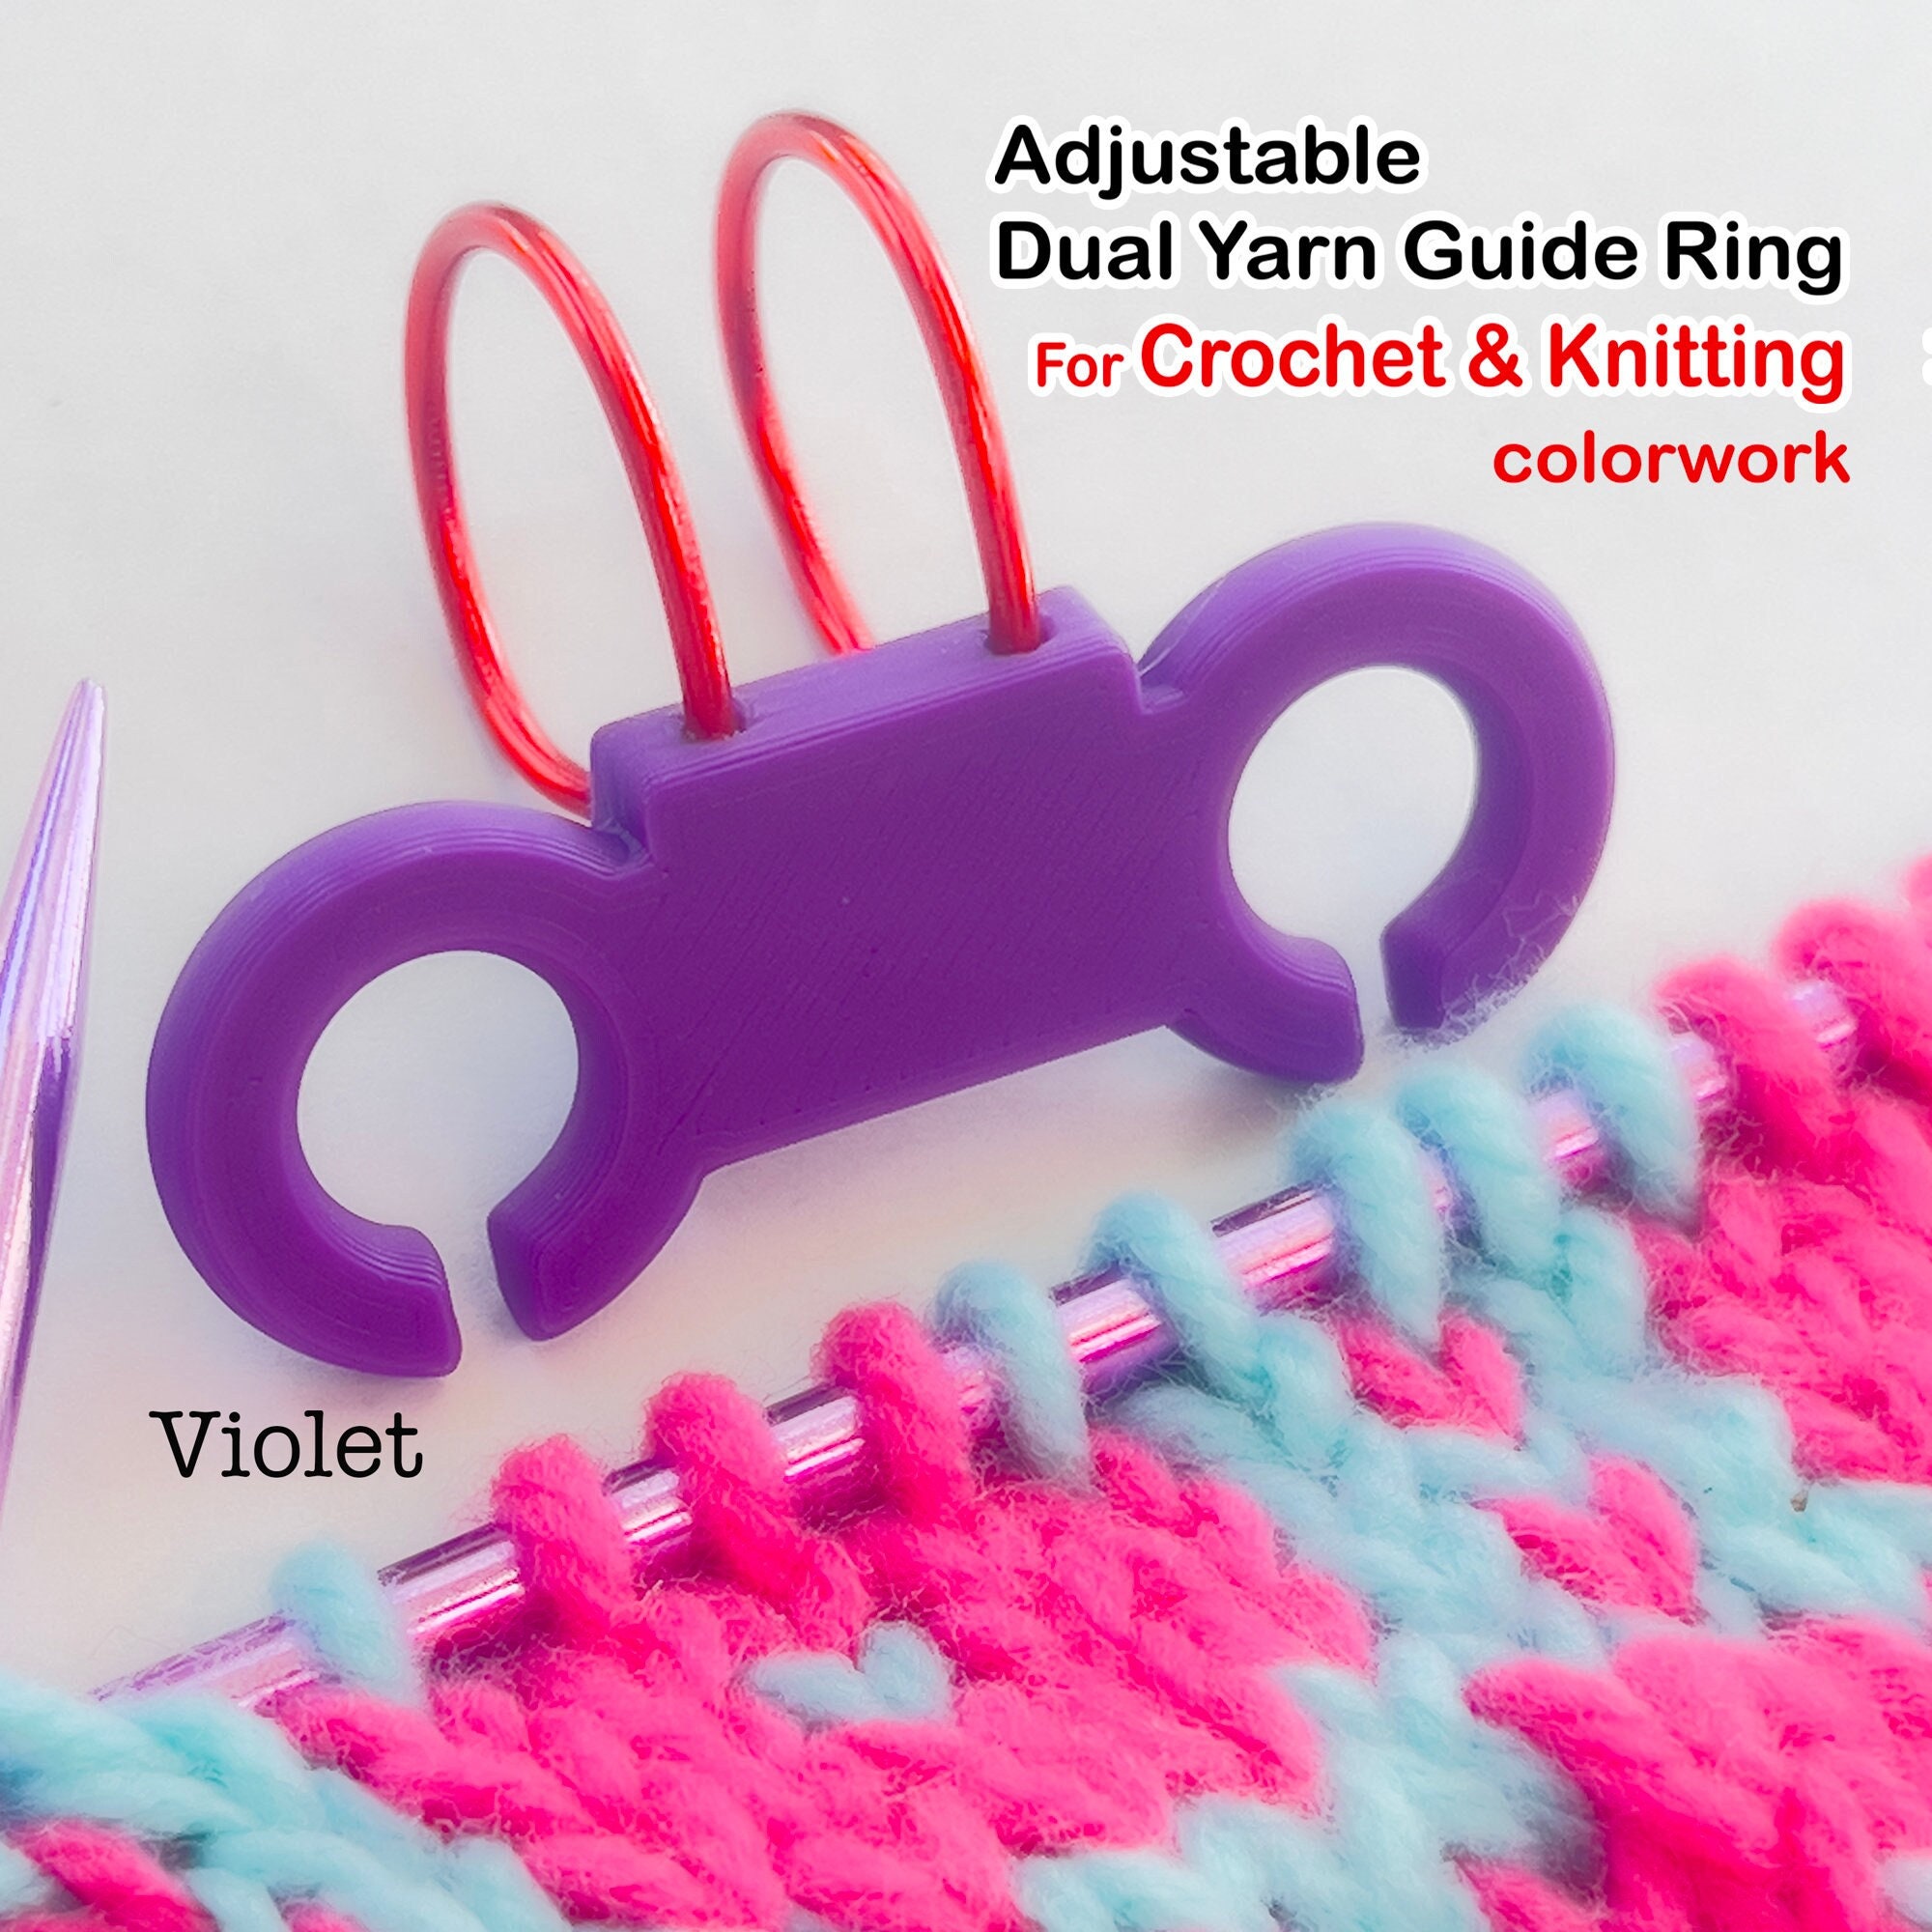 Silver Adjustable Ring - Peacock – 1 Count – Gift Ring / Crochet / Knuckle  Assistant / Yarn Guide / Peacock / Adjustable / Thread Guide